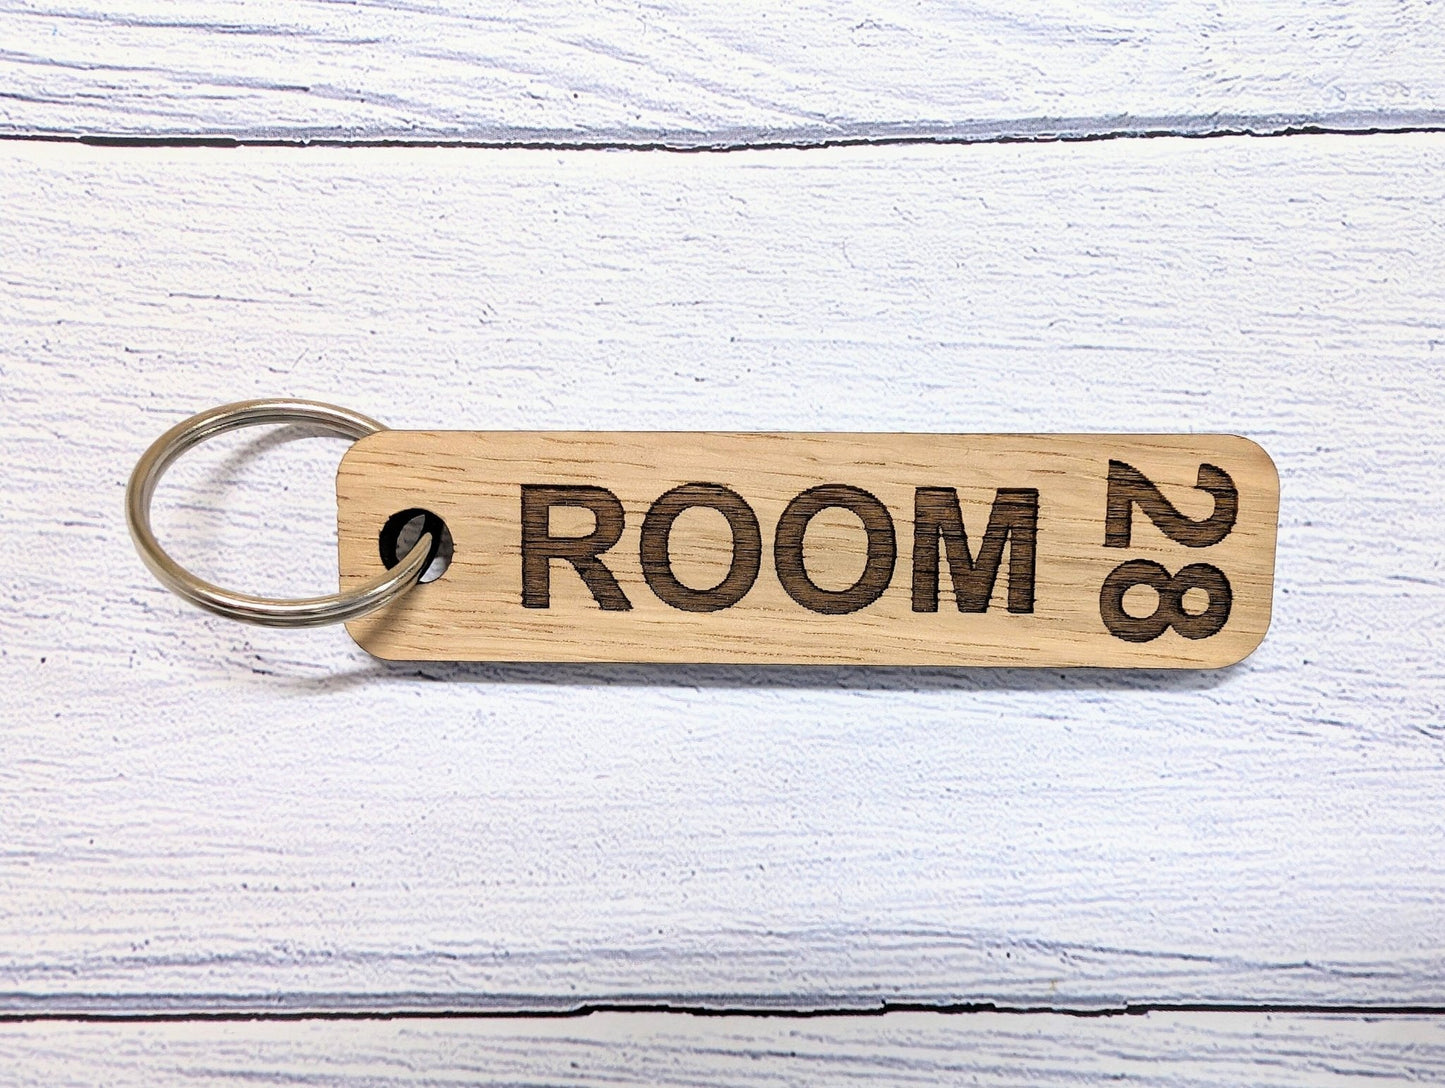 Hotel Room Number Keyrings - High-Quality Oak Veneered MDF - Ideal for Hotels, B&Bs, and Guest Houses - CherryGroveCraft